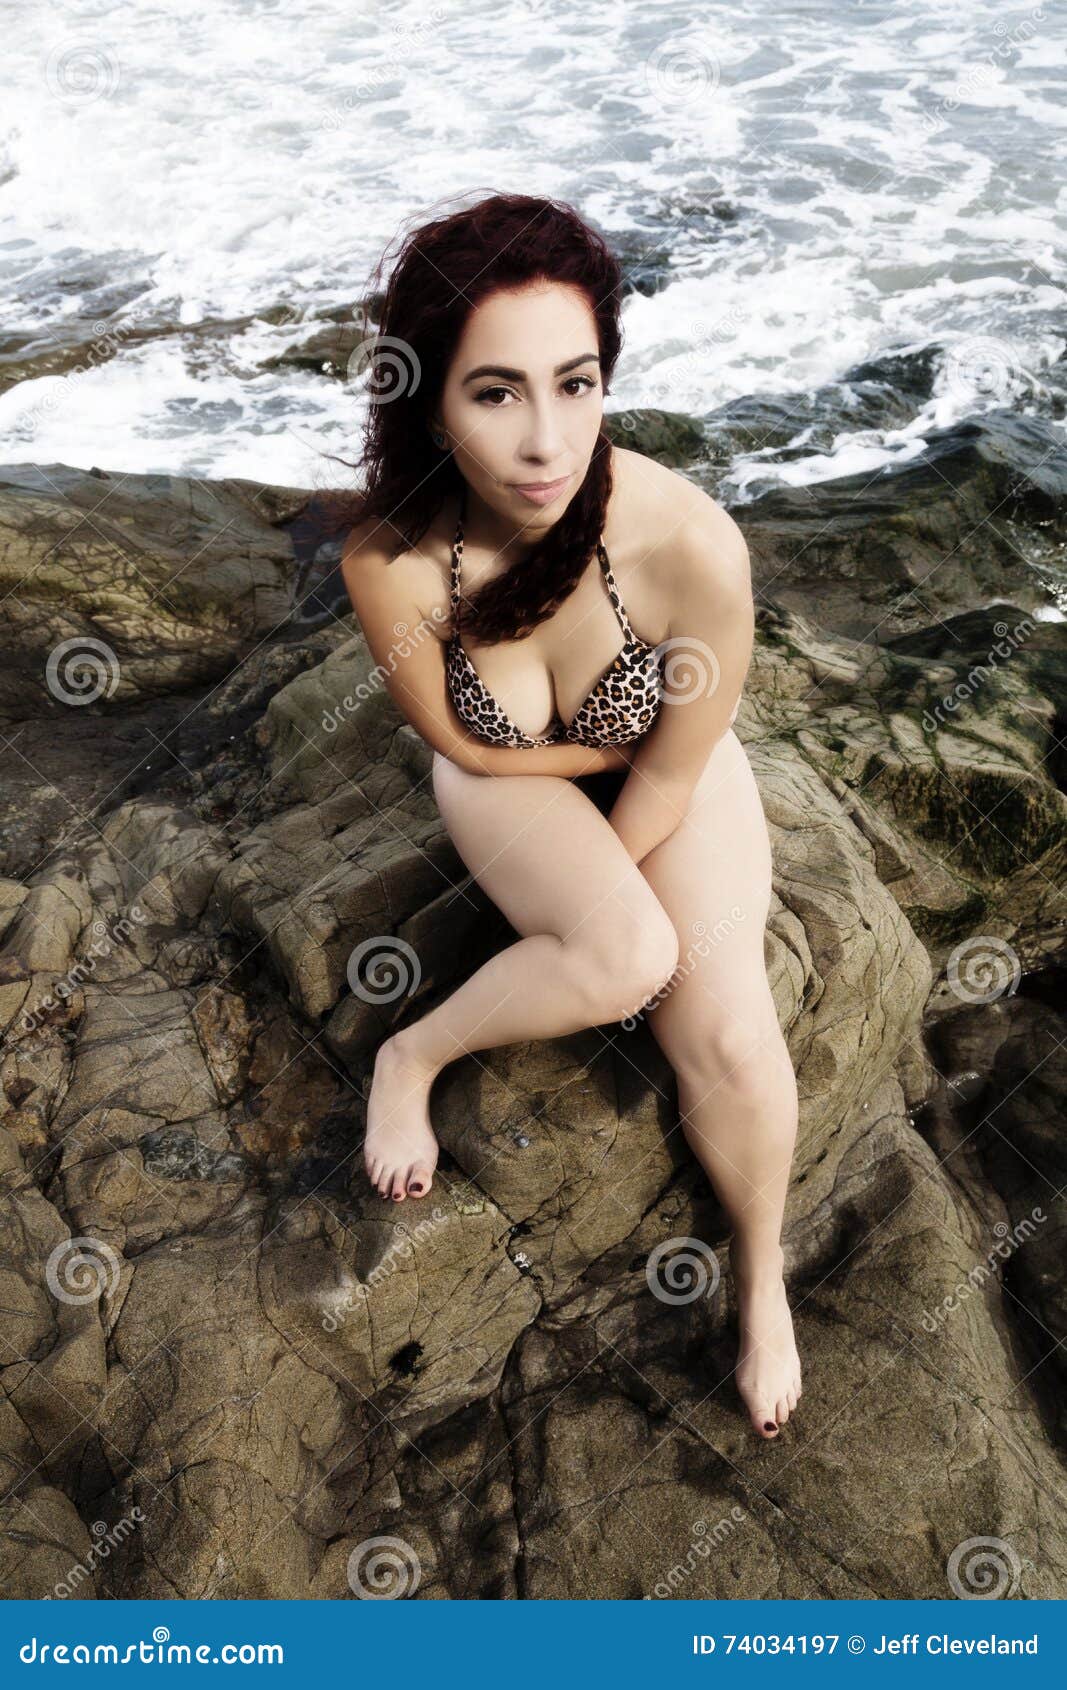 Latina Woman Sitting On Rocks In Bikini With Ocean Behind Her Stock 58960 Hot Sex Picture picture pic